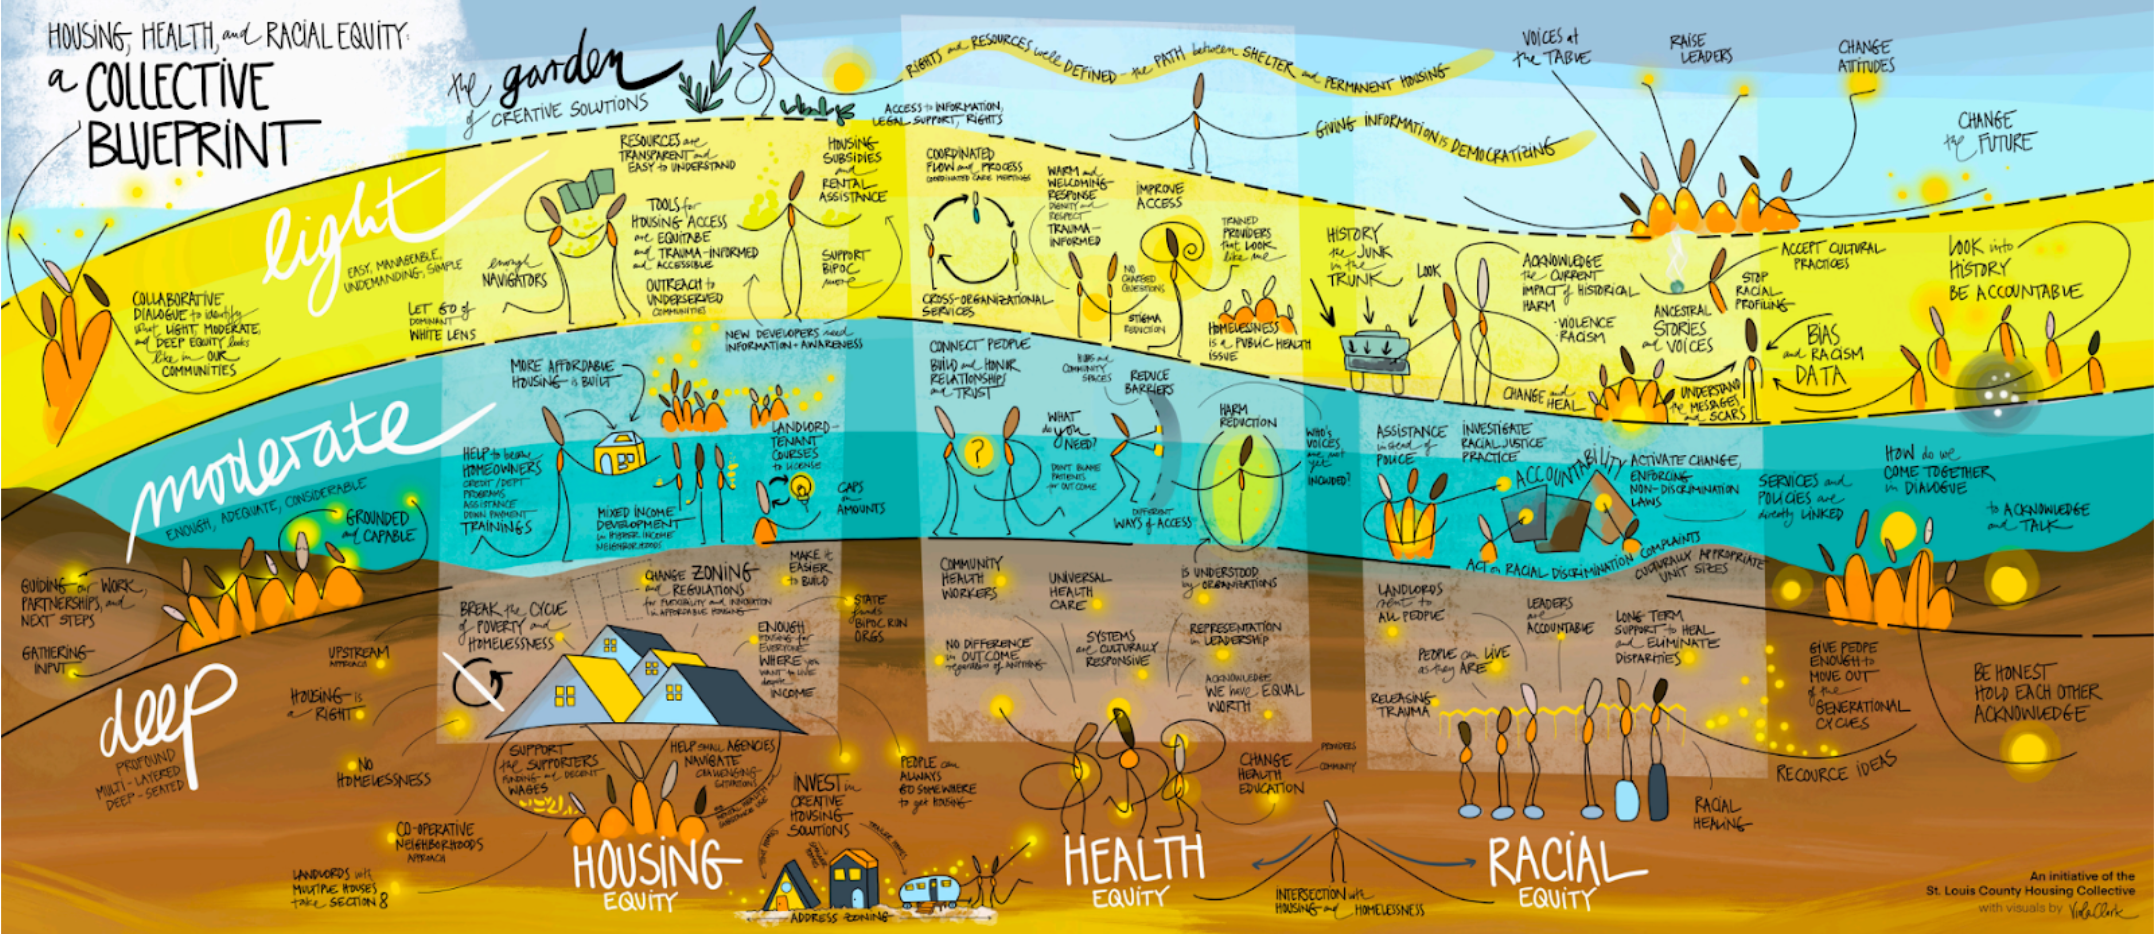 A illustrated poster showing a collective blueprint of housing, health, and racial equity